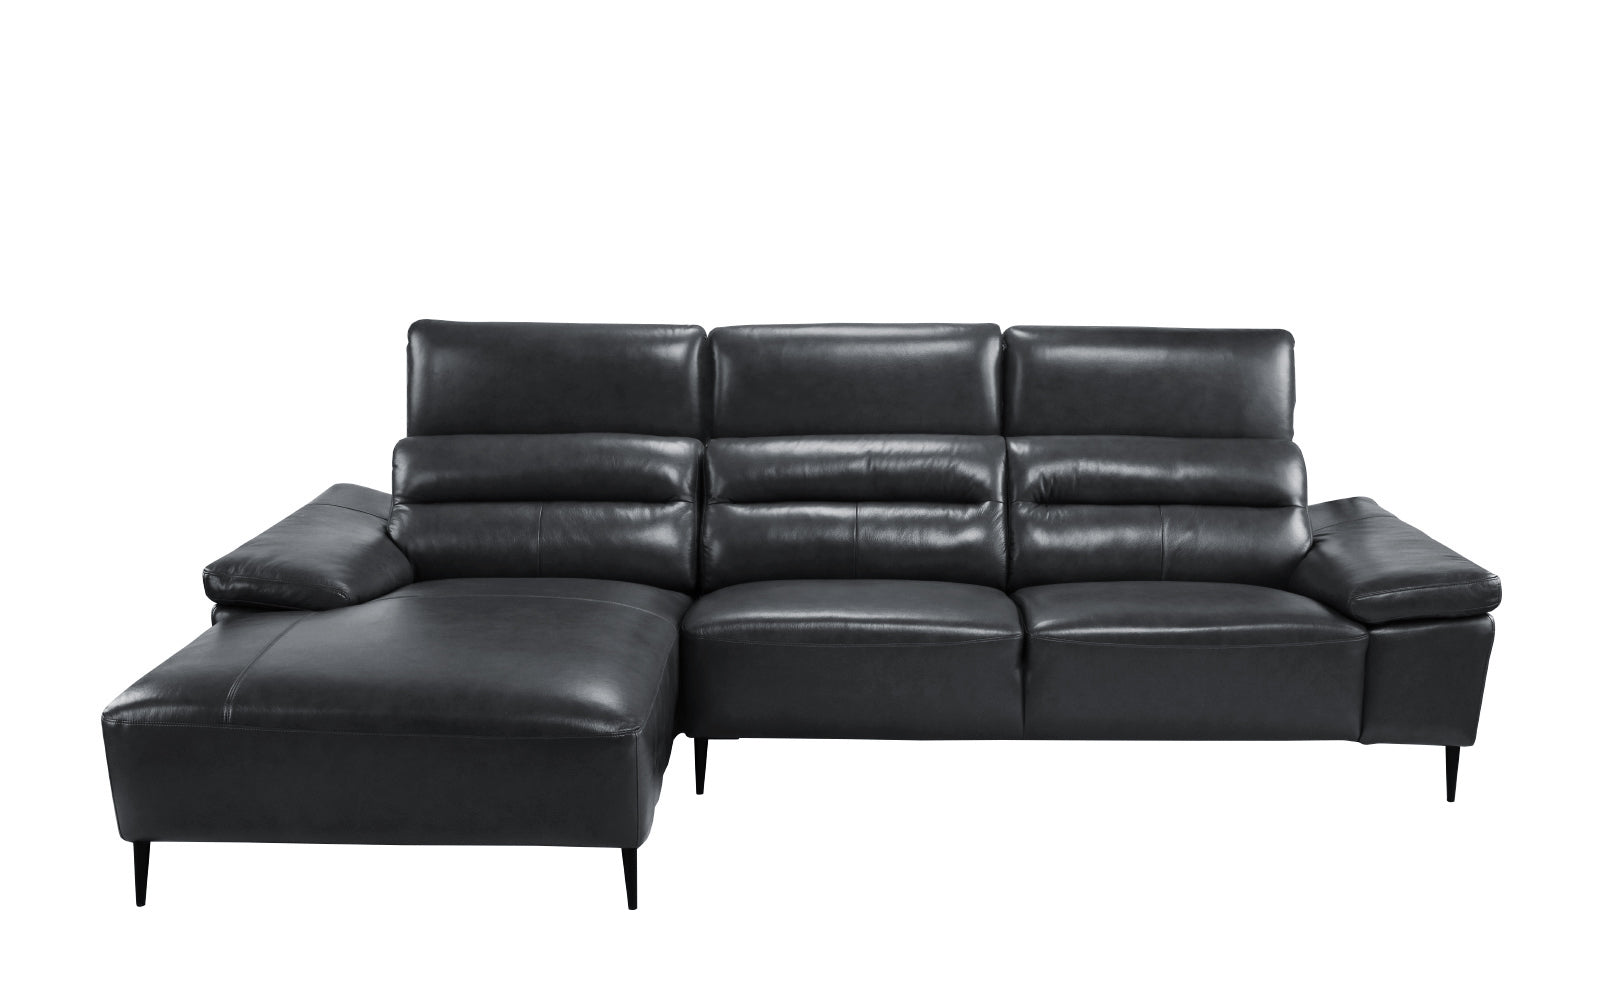 Rocco 70s-inspired Leather Match Sectional Sofa With Left Chaise